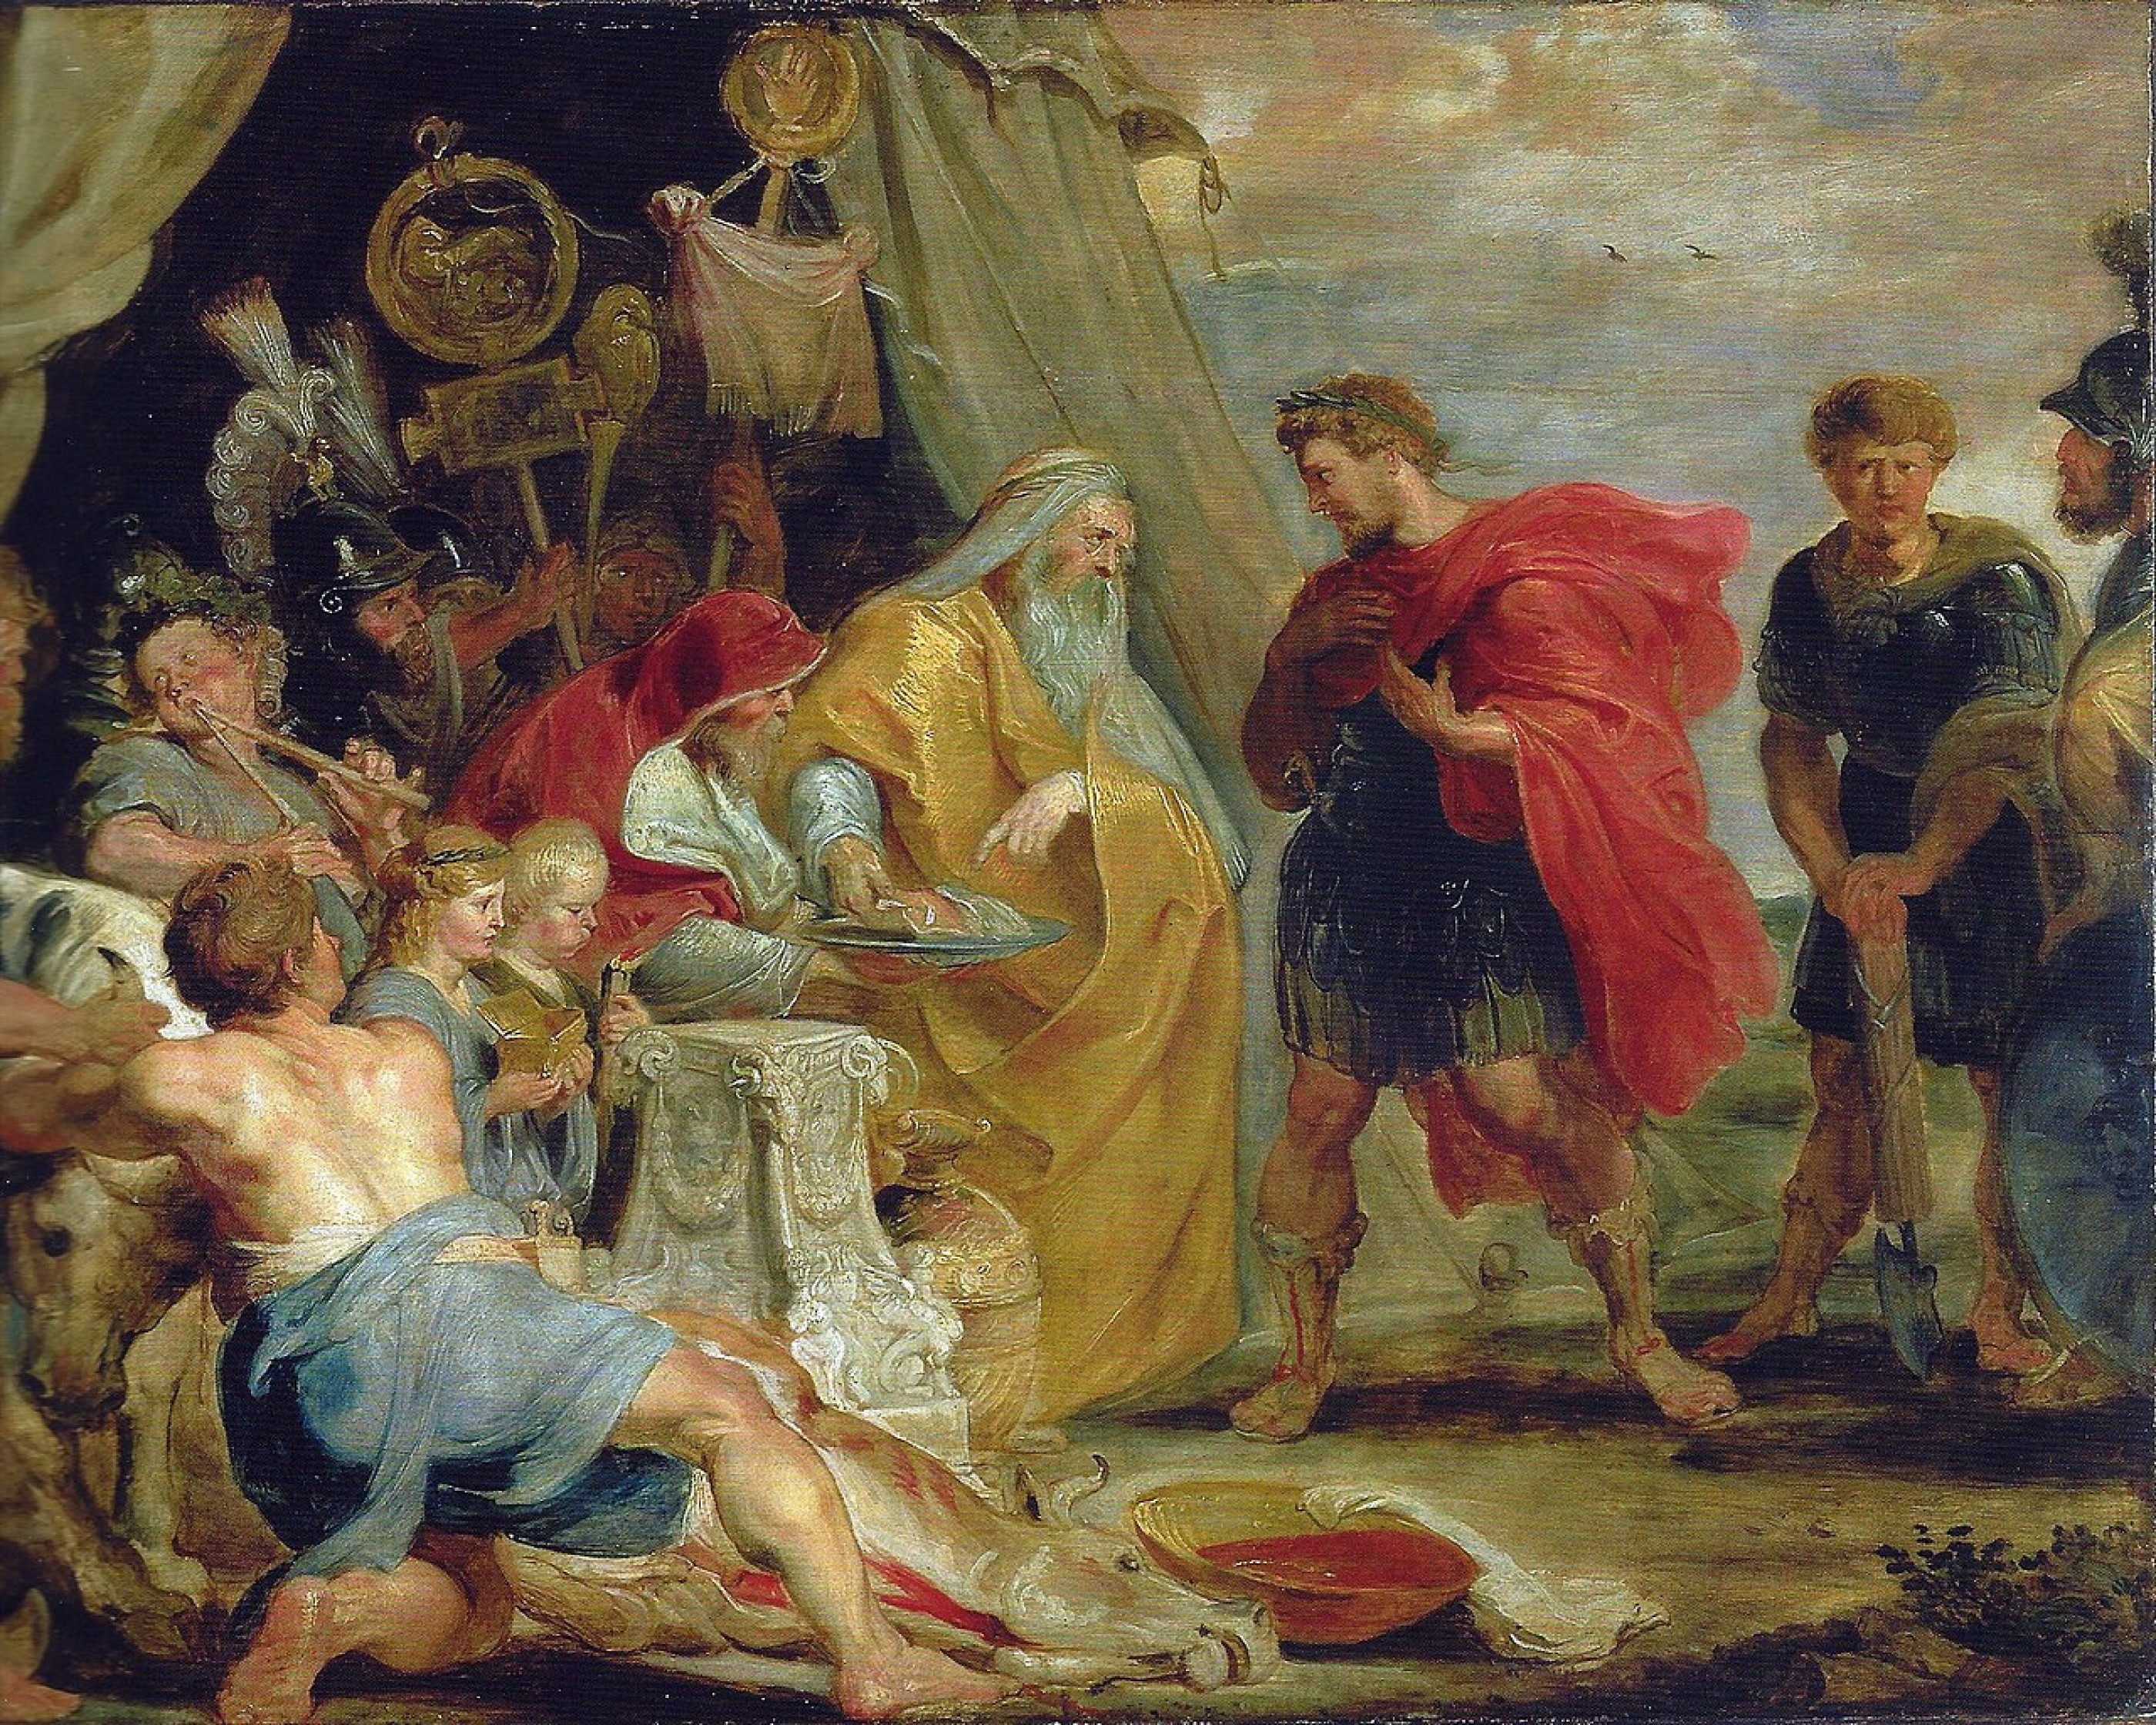 Fig.1: Decius Mus consulting the Haruspices (1617) by Peter Paul Rubins